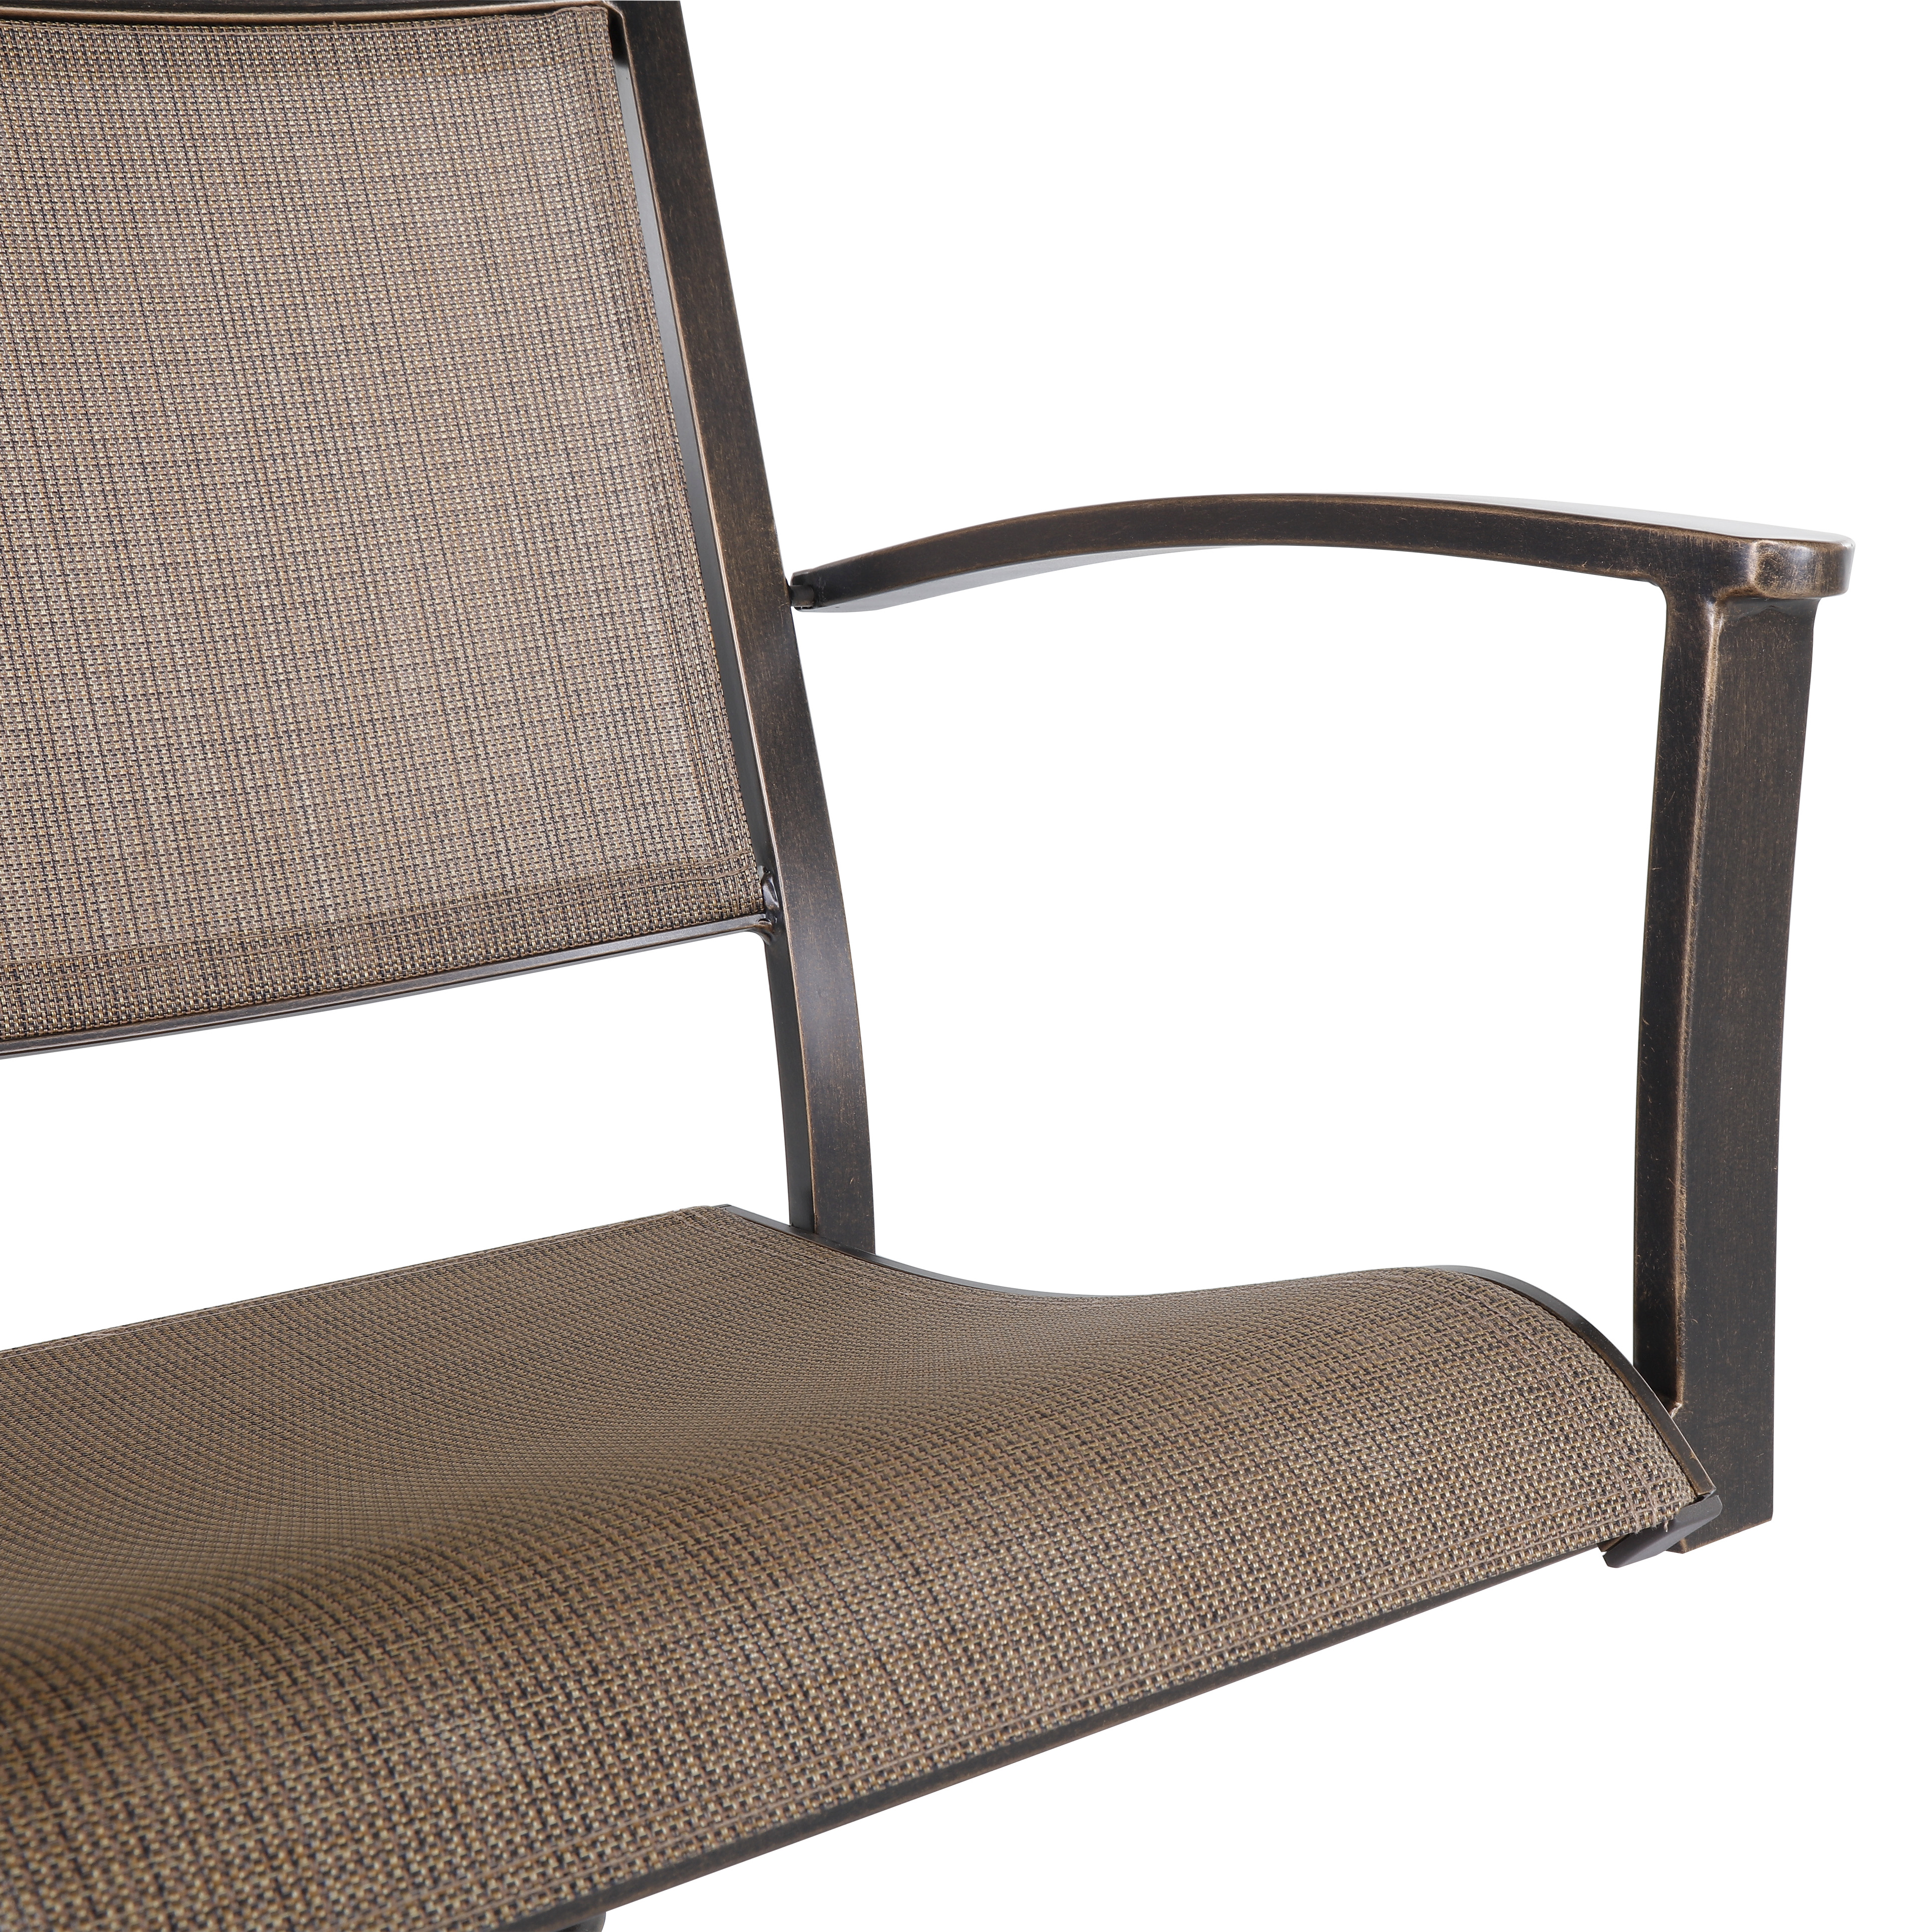 All Weather Patio Dining Chair, Sling Fabric Swivel Rocker With Rustproof Finish Aluminum Frame, Outdoor Garden Furniture 2 Pieces Sets - image 3 of 11